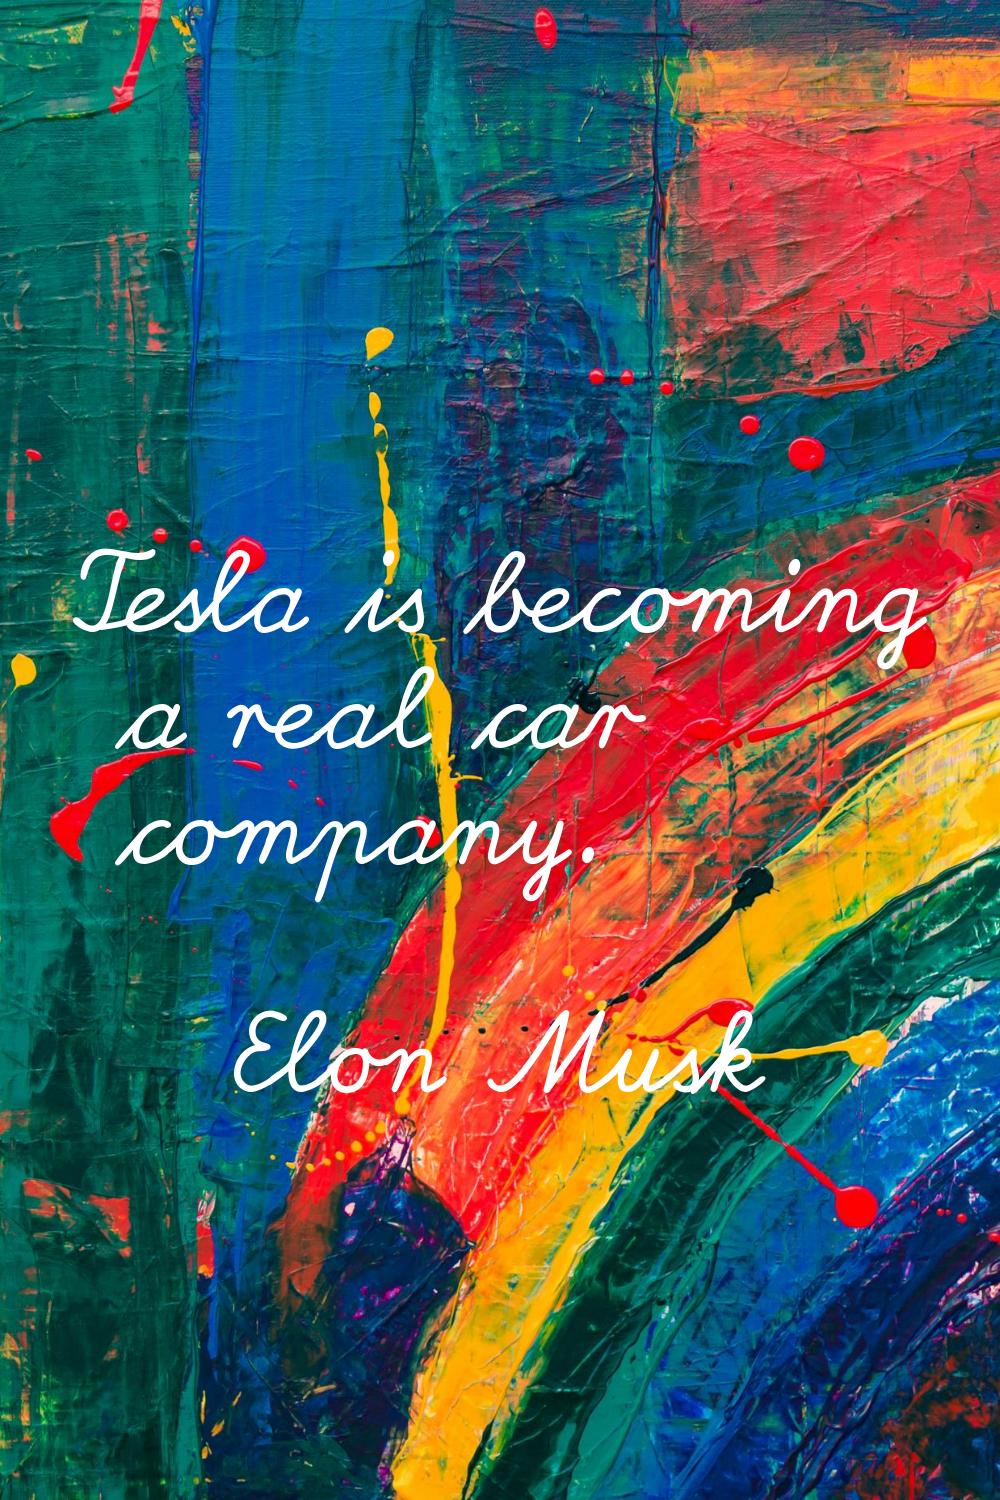 Tesla is becoming a real car company.